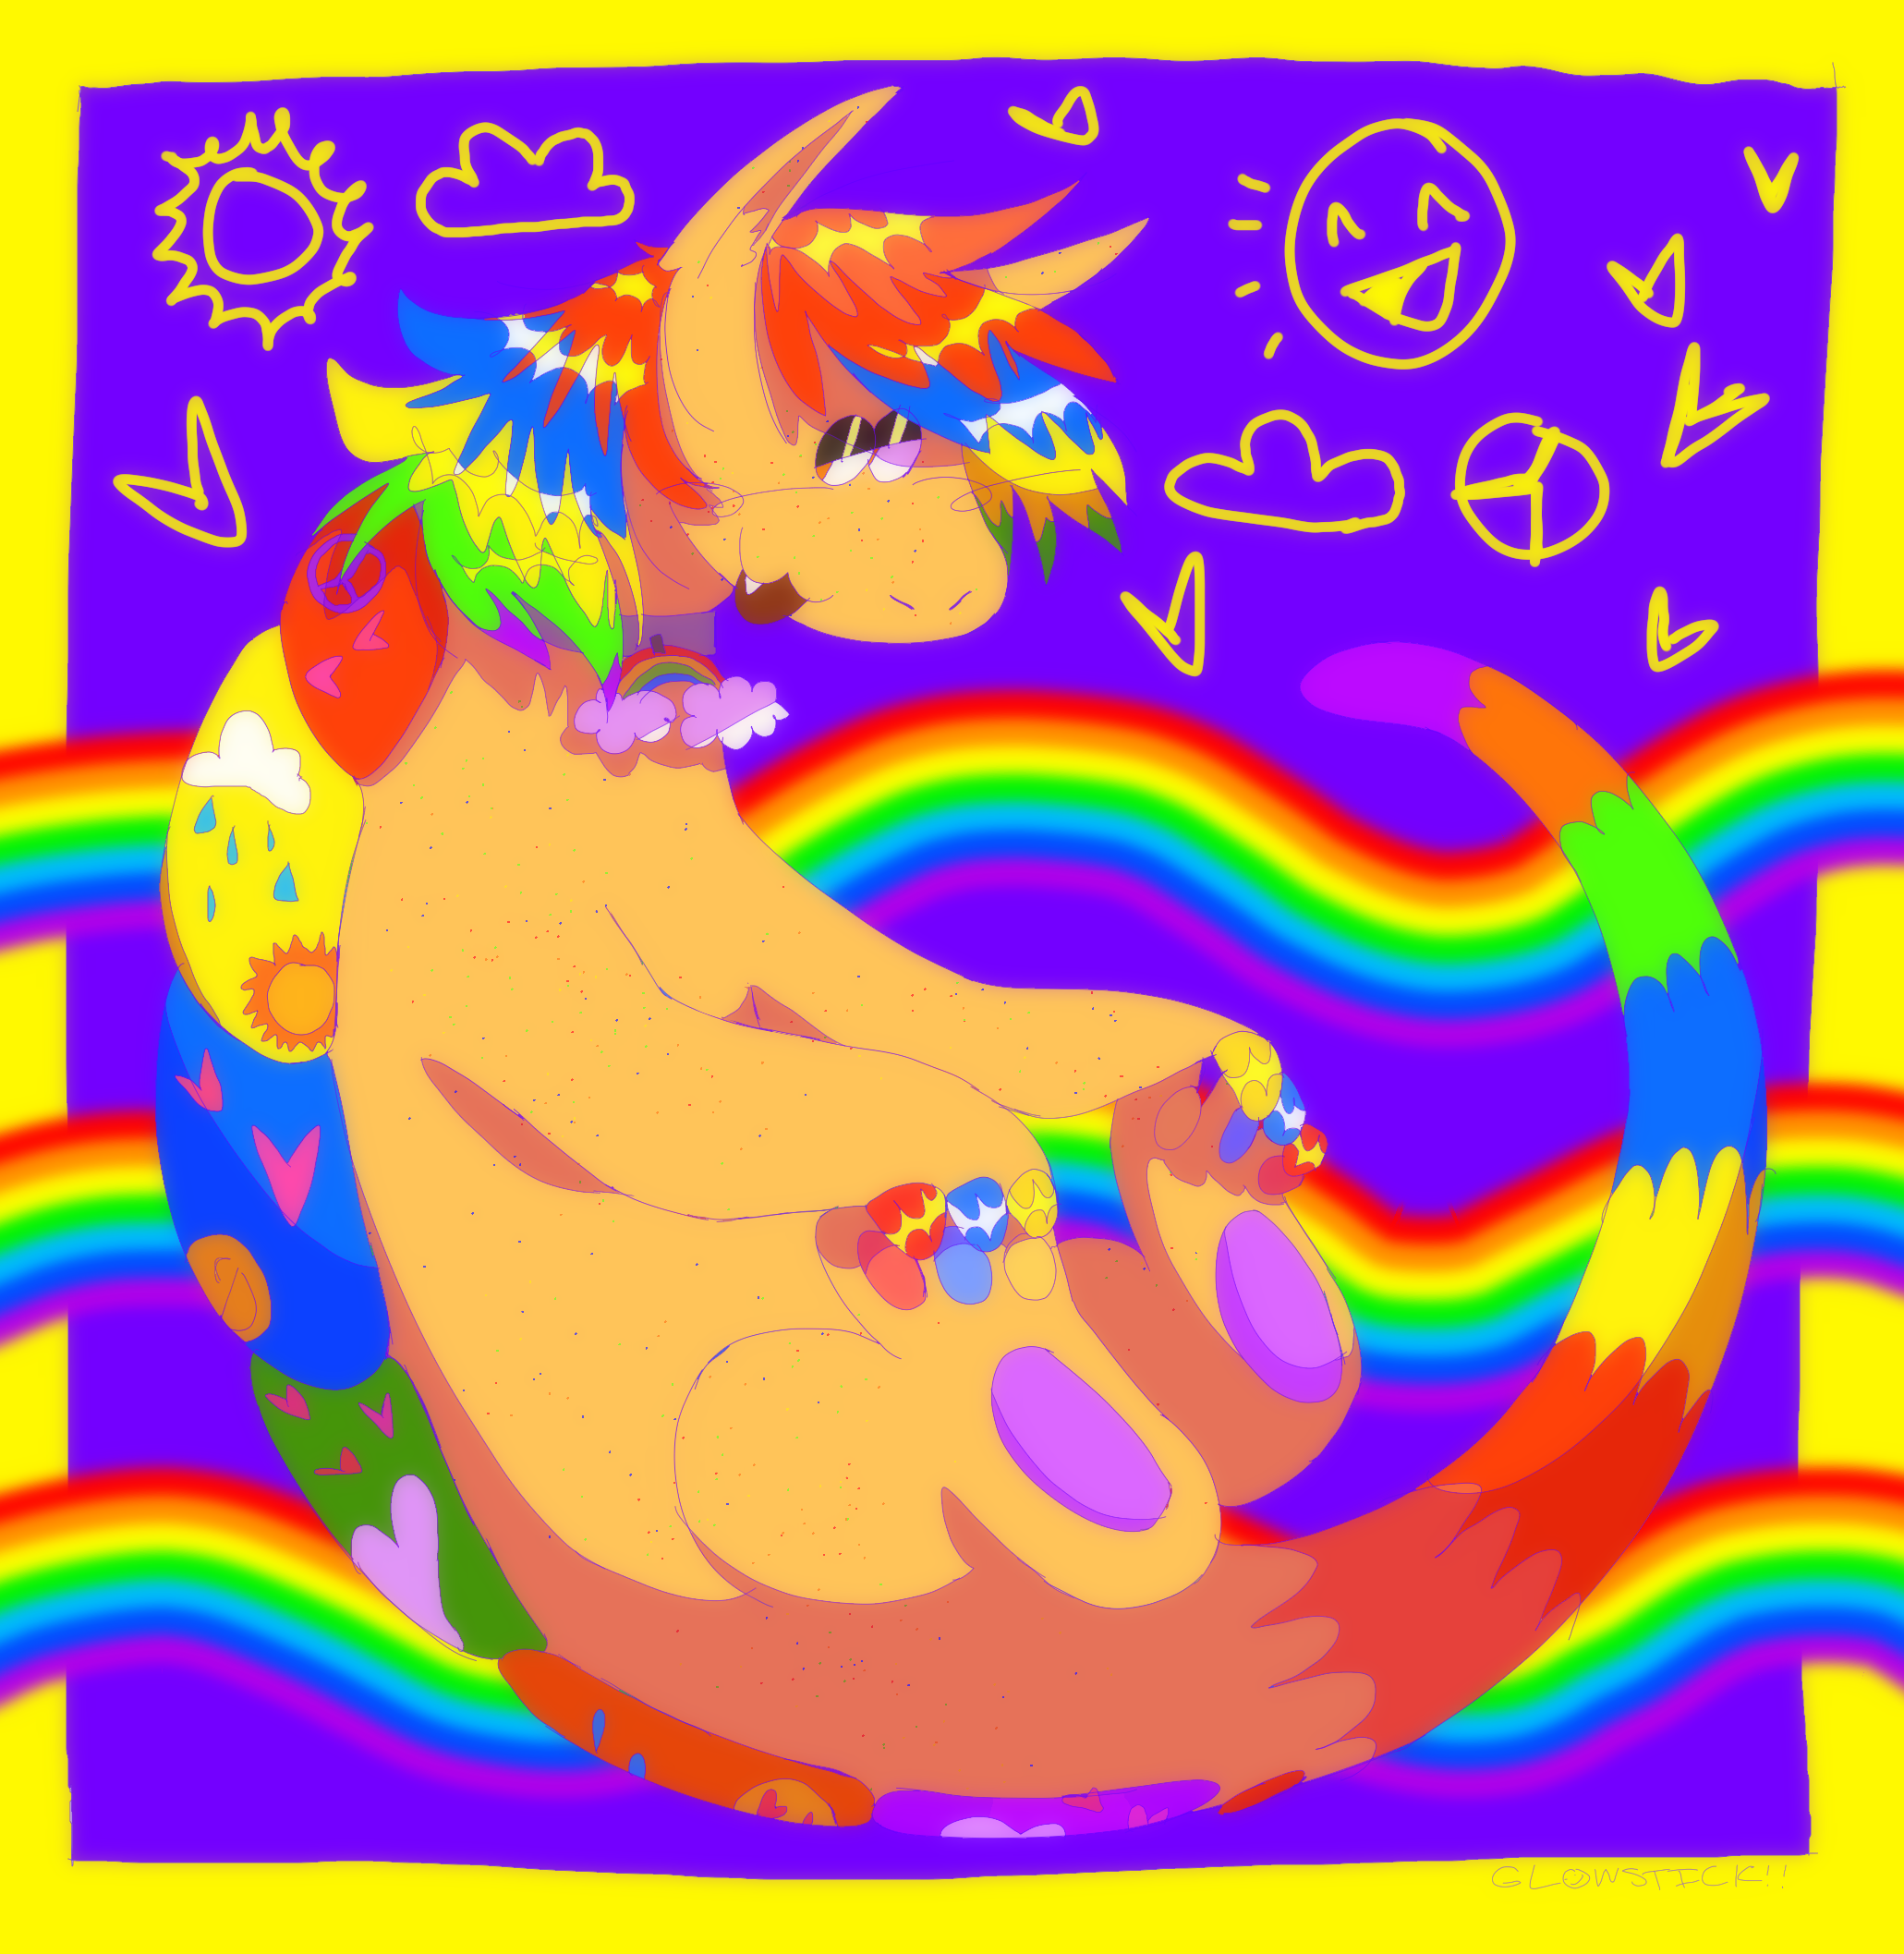 A brightly colored drawing of an anthropomorphic armadillo. Their shell is rainbow with many small drawings on it, and their fur is cream colored with rainbow speckles.